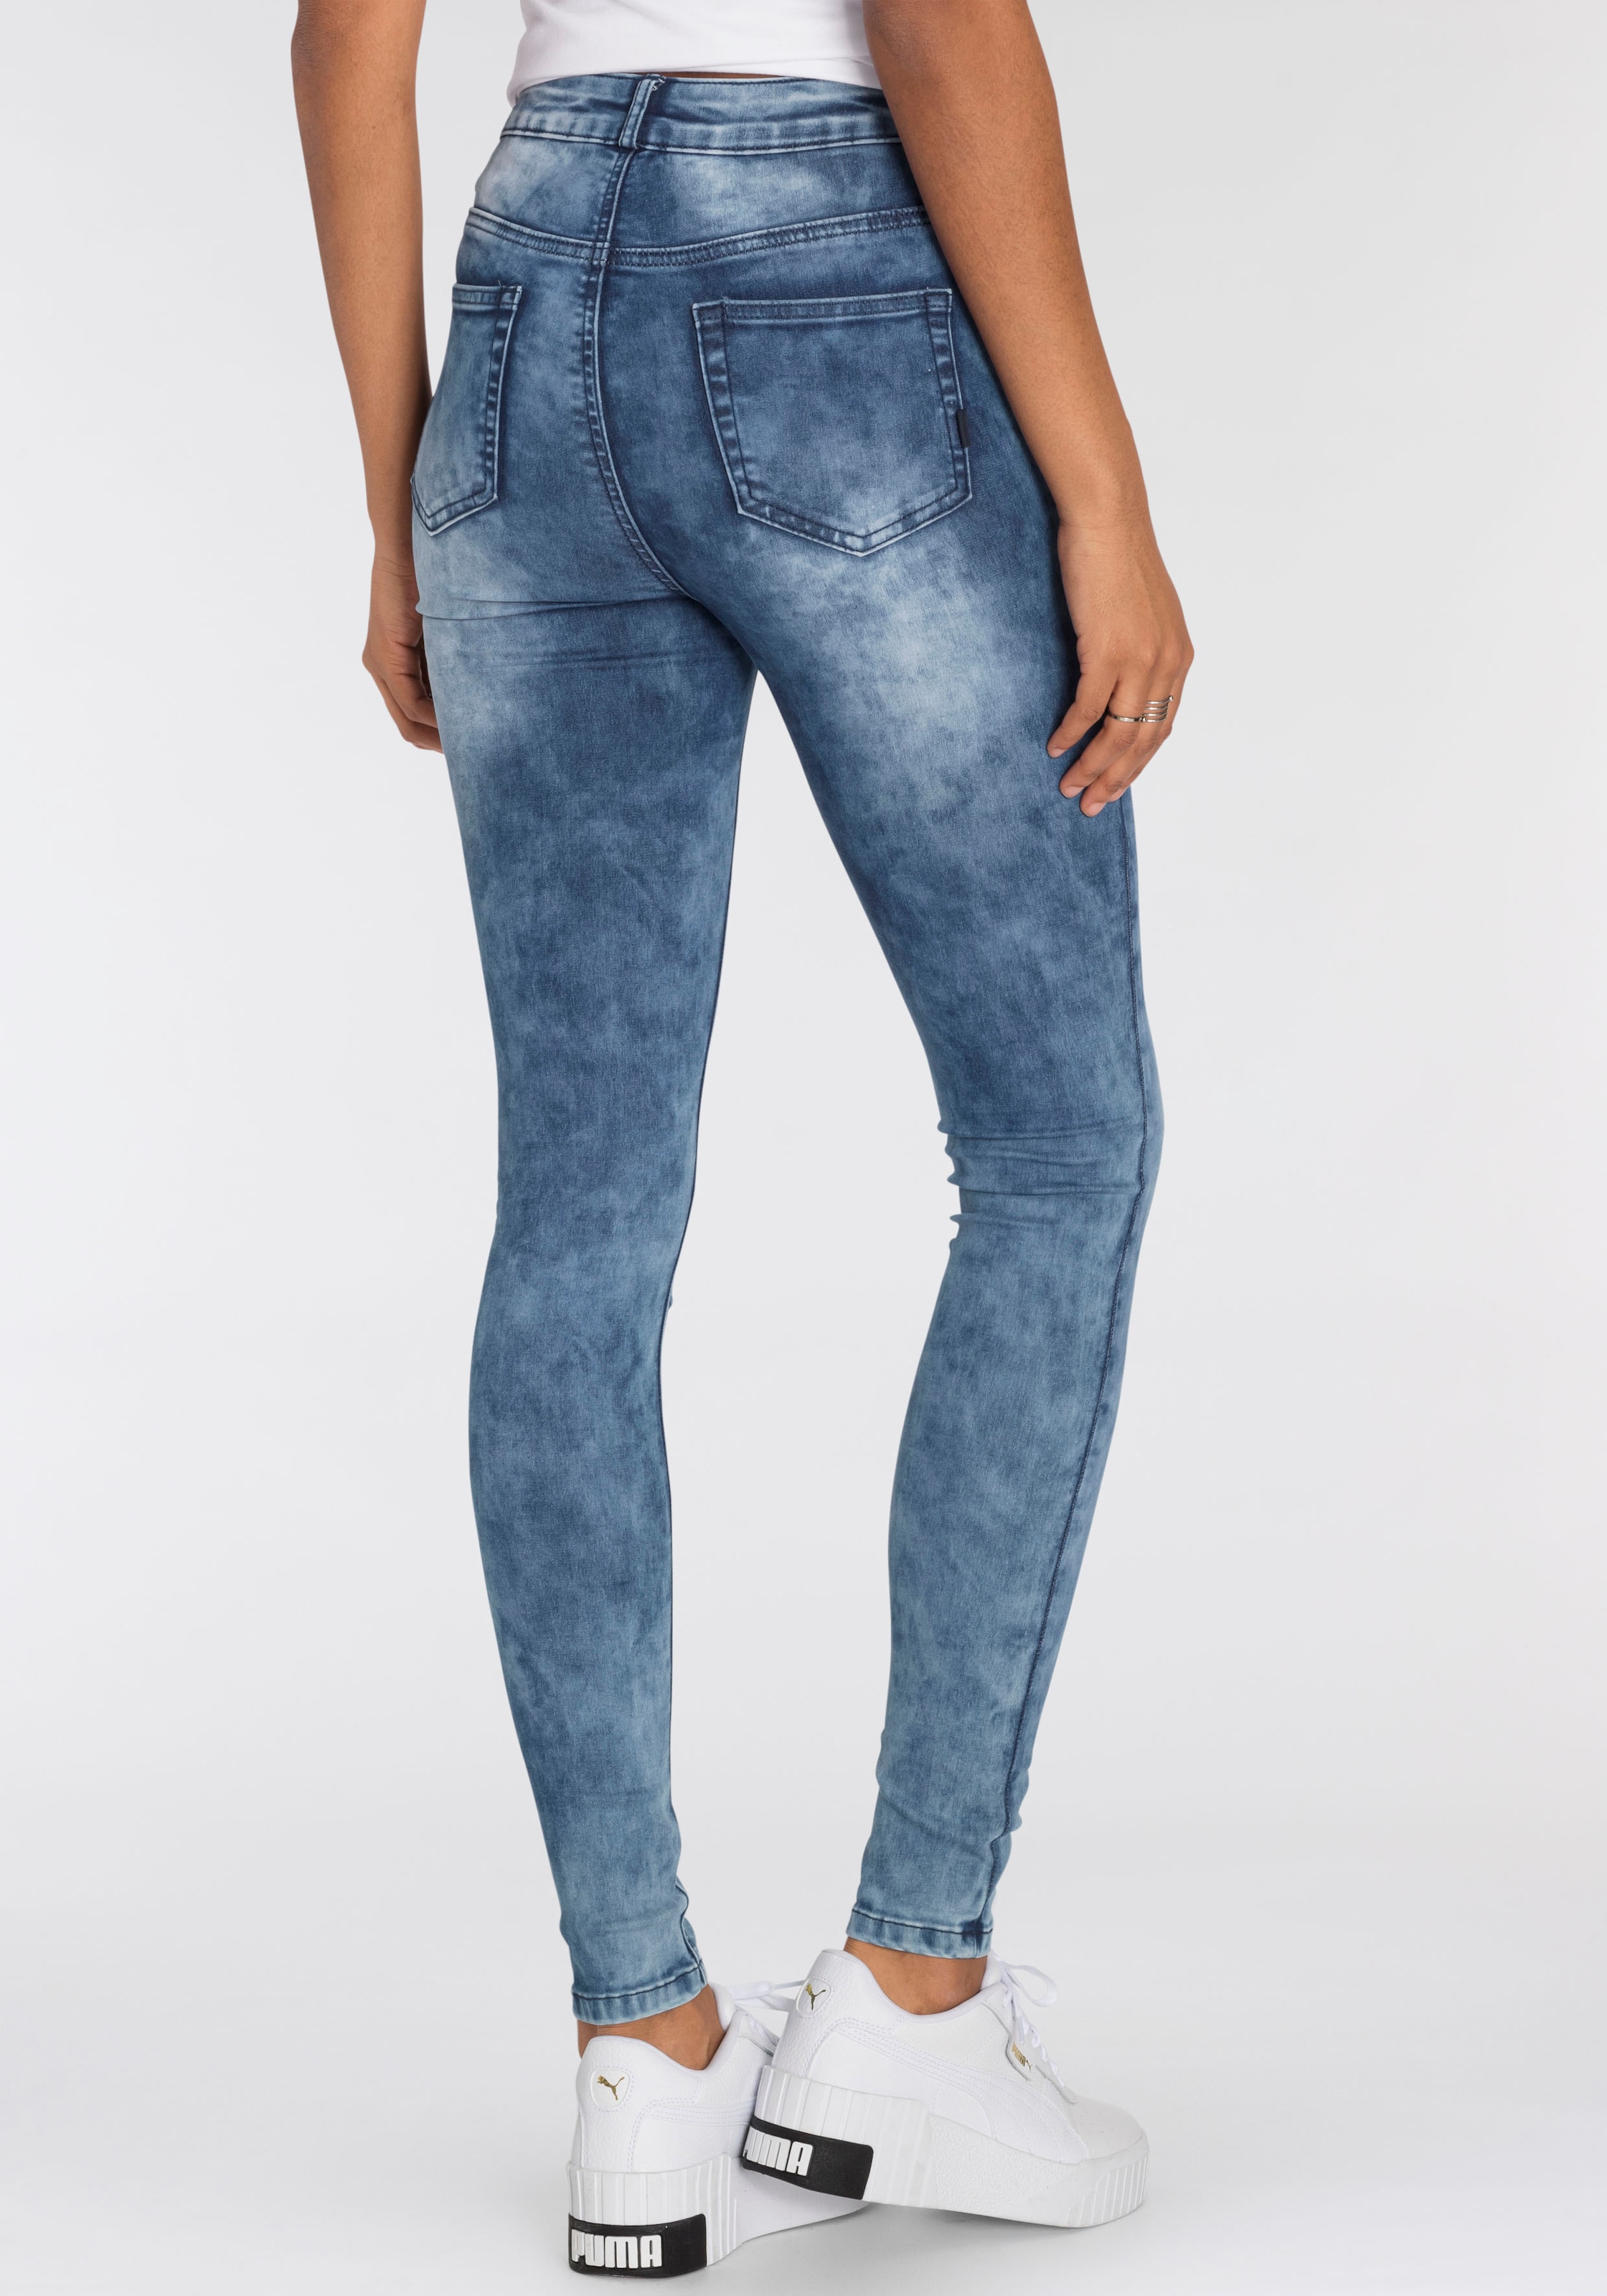 Arizona Skinny-fit-Jeans »Ultra Stretch moon I\'m Jeans washed«, Moonwashed | walking shoppen